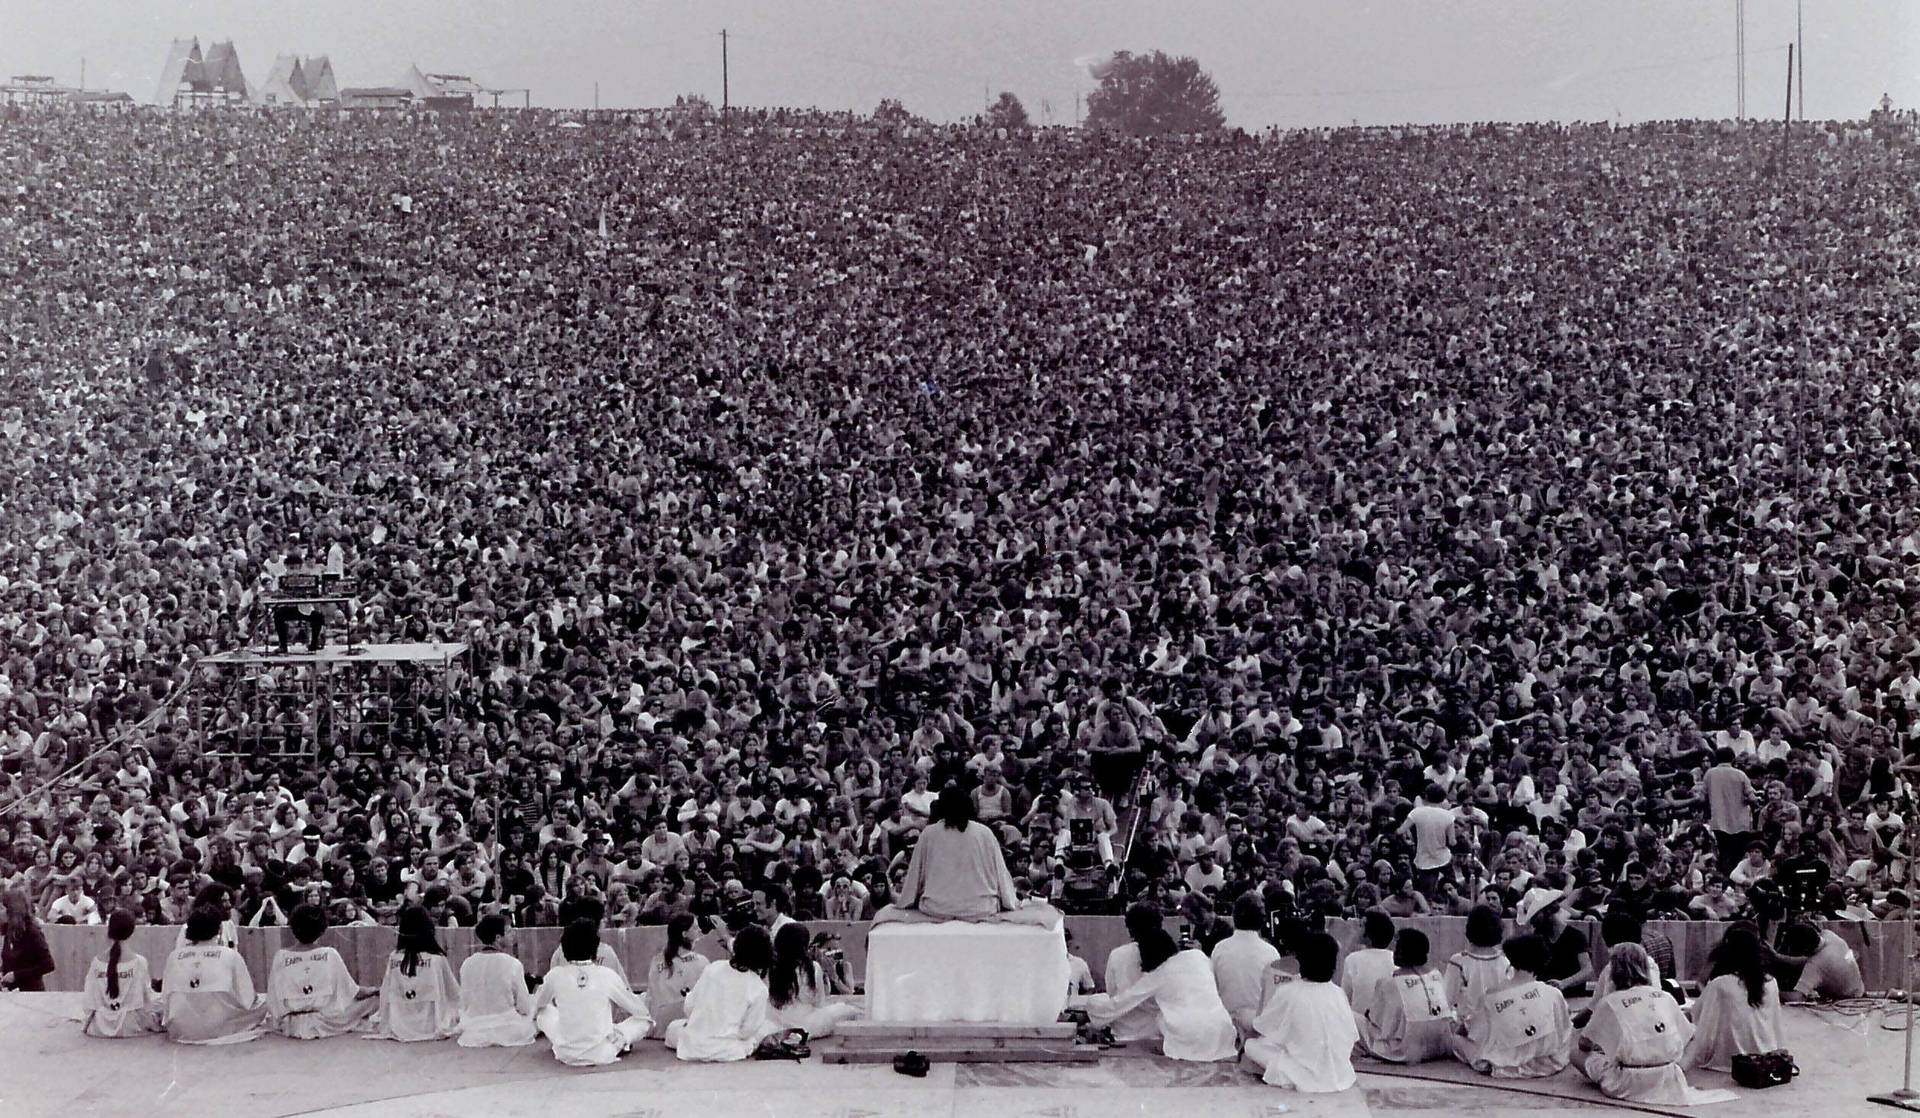 Woodstock Black And White Crowd Background